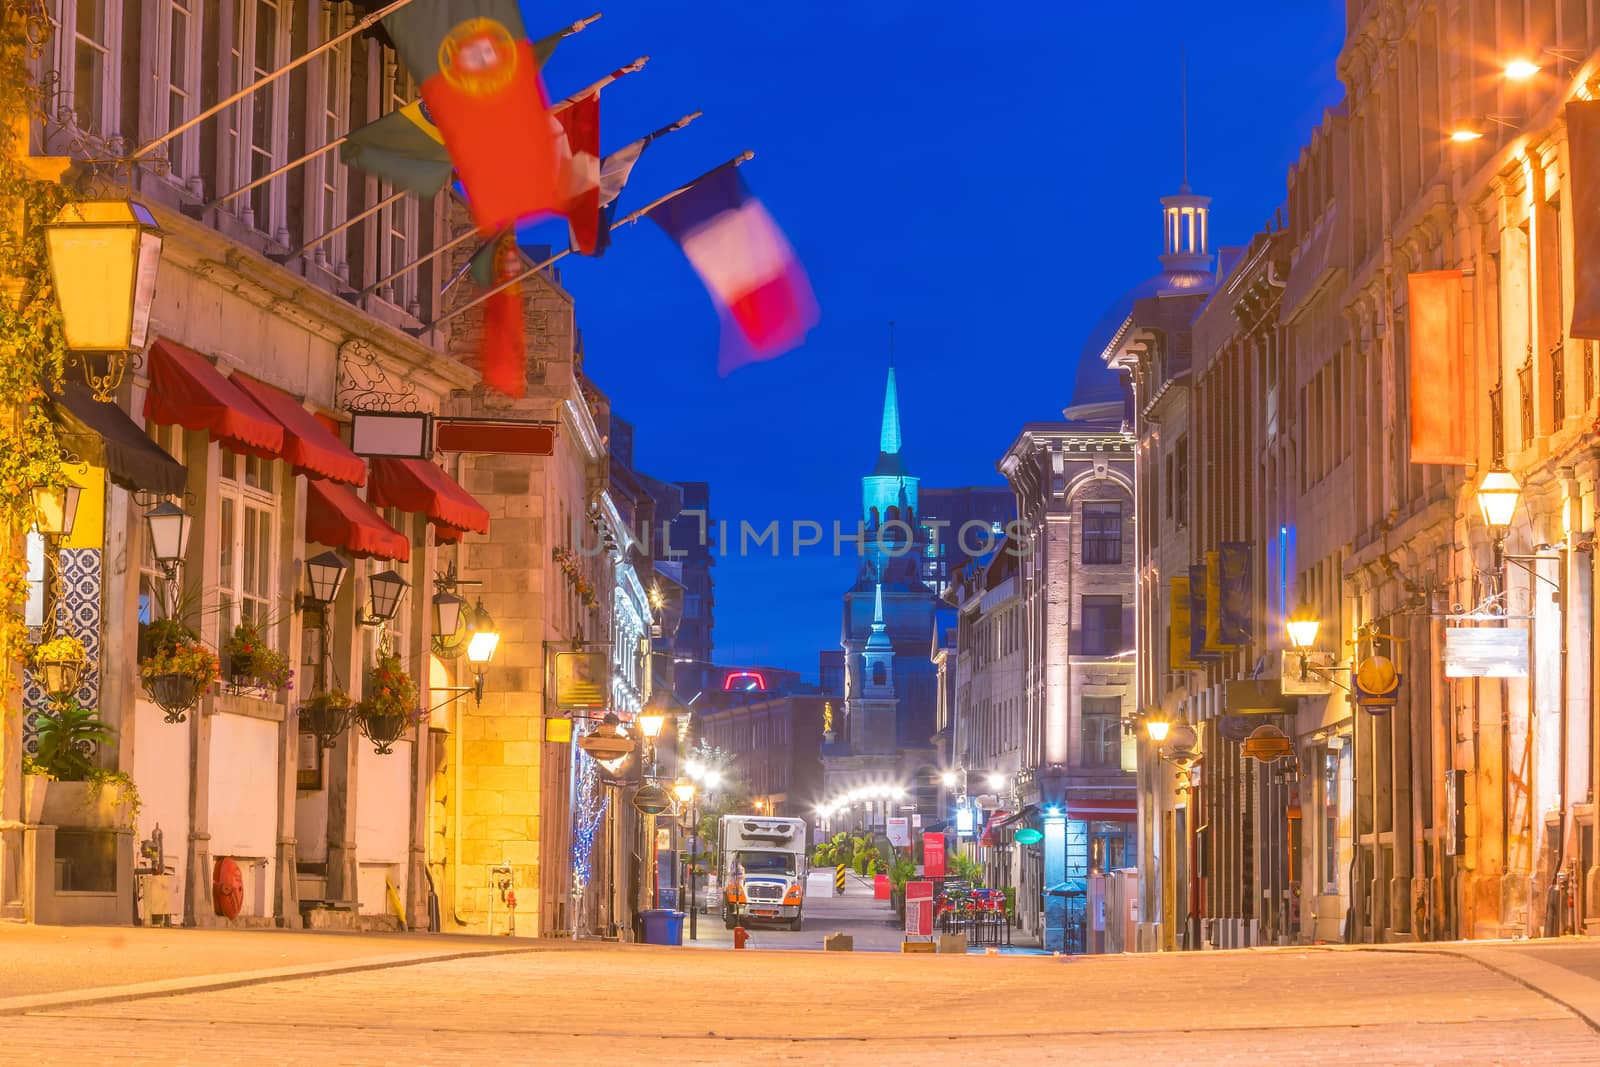 Old town Montreal at famous Cobbled streets at twilight by f11photo